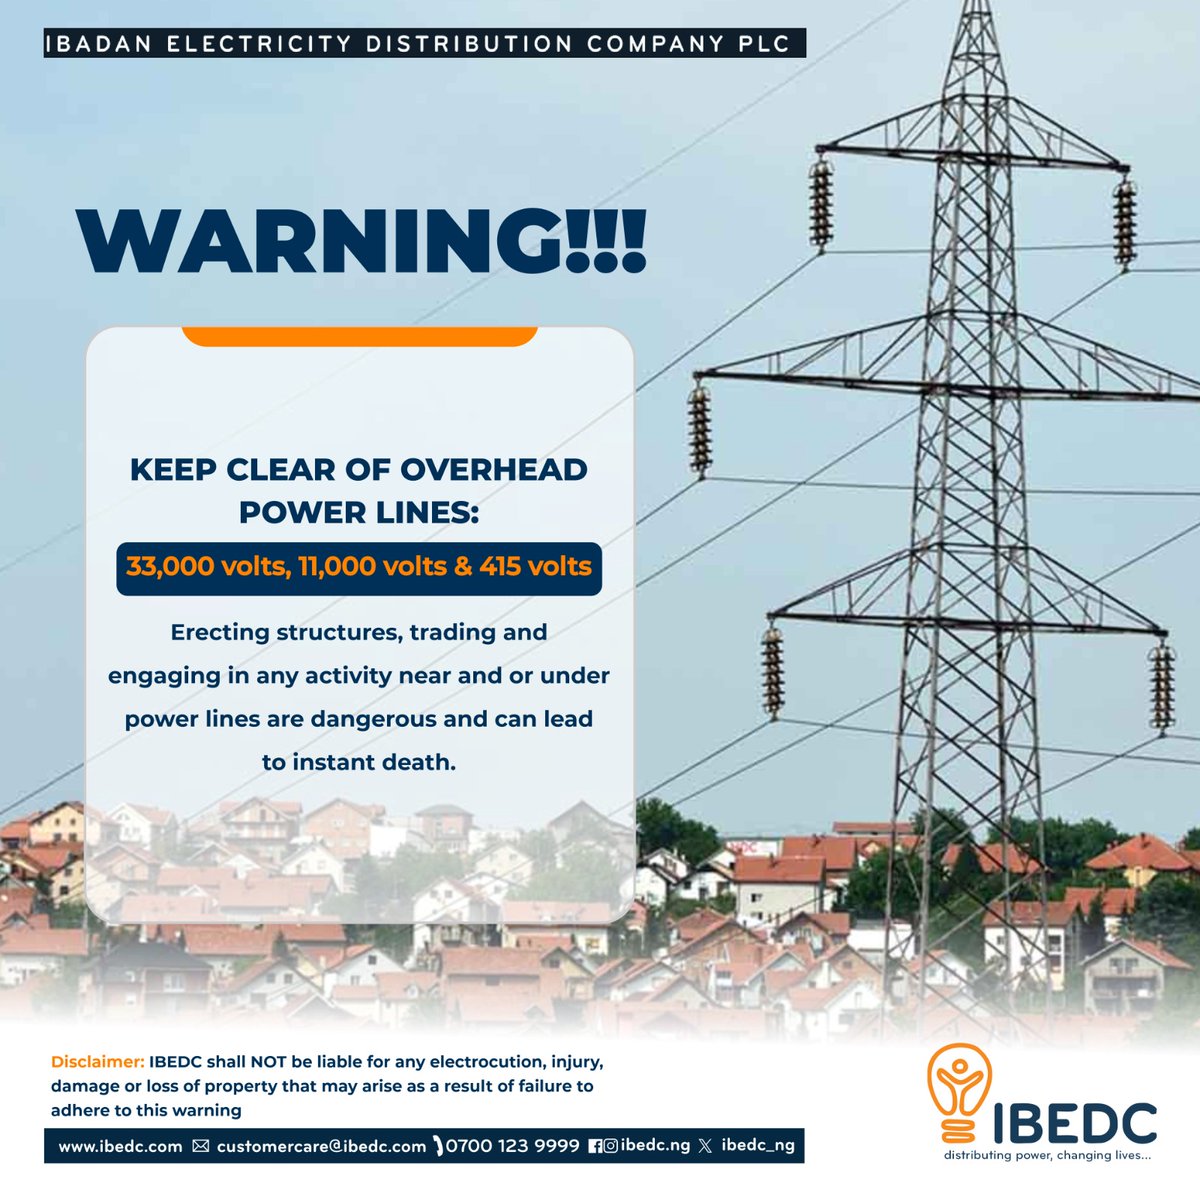 Warning!!!
Avoid coming into contact with overhead power lines.

#ibedc #staysafe #safetyfirst #safetyalways #childsafety #distributingpower #changinglives